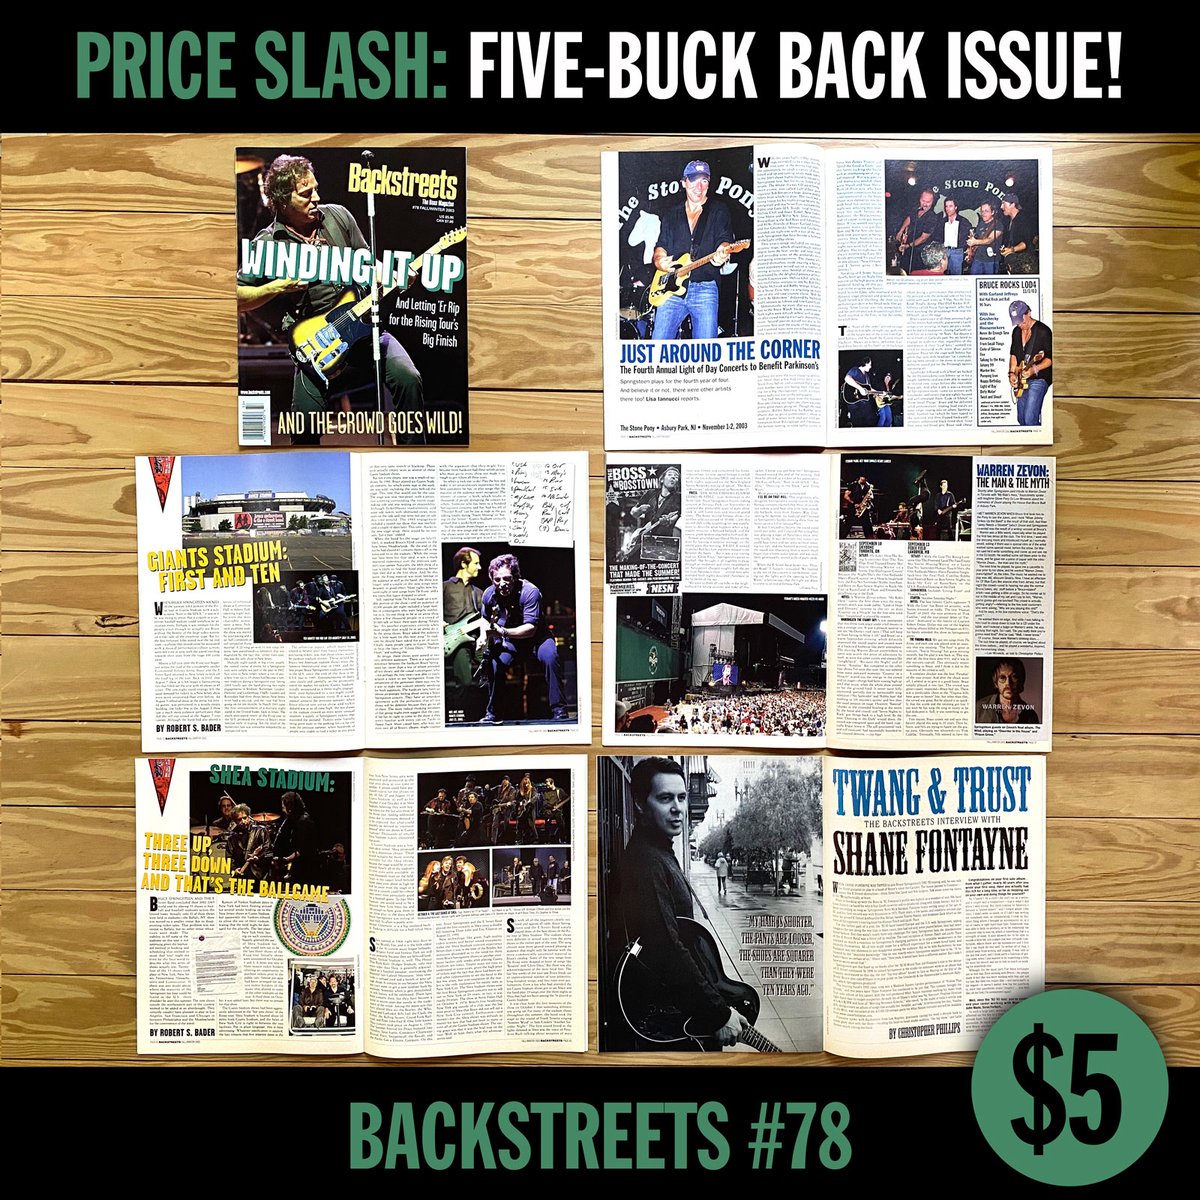 FIVE-BUCK BACK ISSUES! New markdowns in our shop, with a dozen issues of Backstreets now on sale for $5 each. So much Springsteen history preserved in these pages.… #78 chronicles the 2003 Rising tour and gets the 92/93 story from Shane Fontayne: backstreets.com/Merchant2/merc…